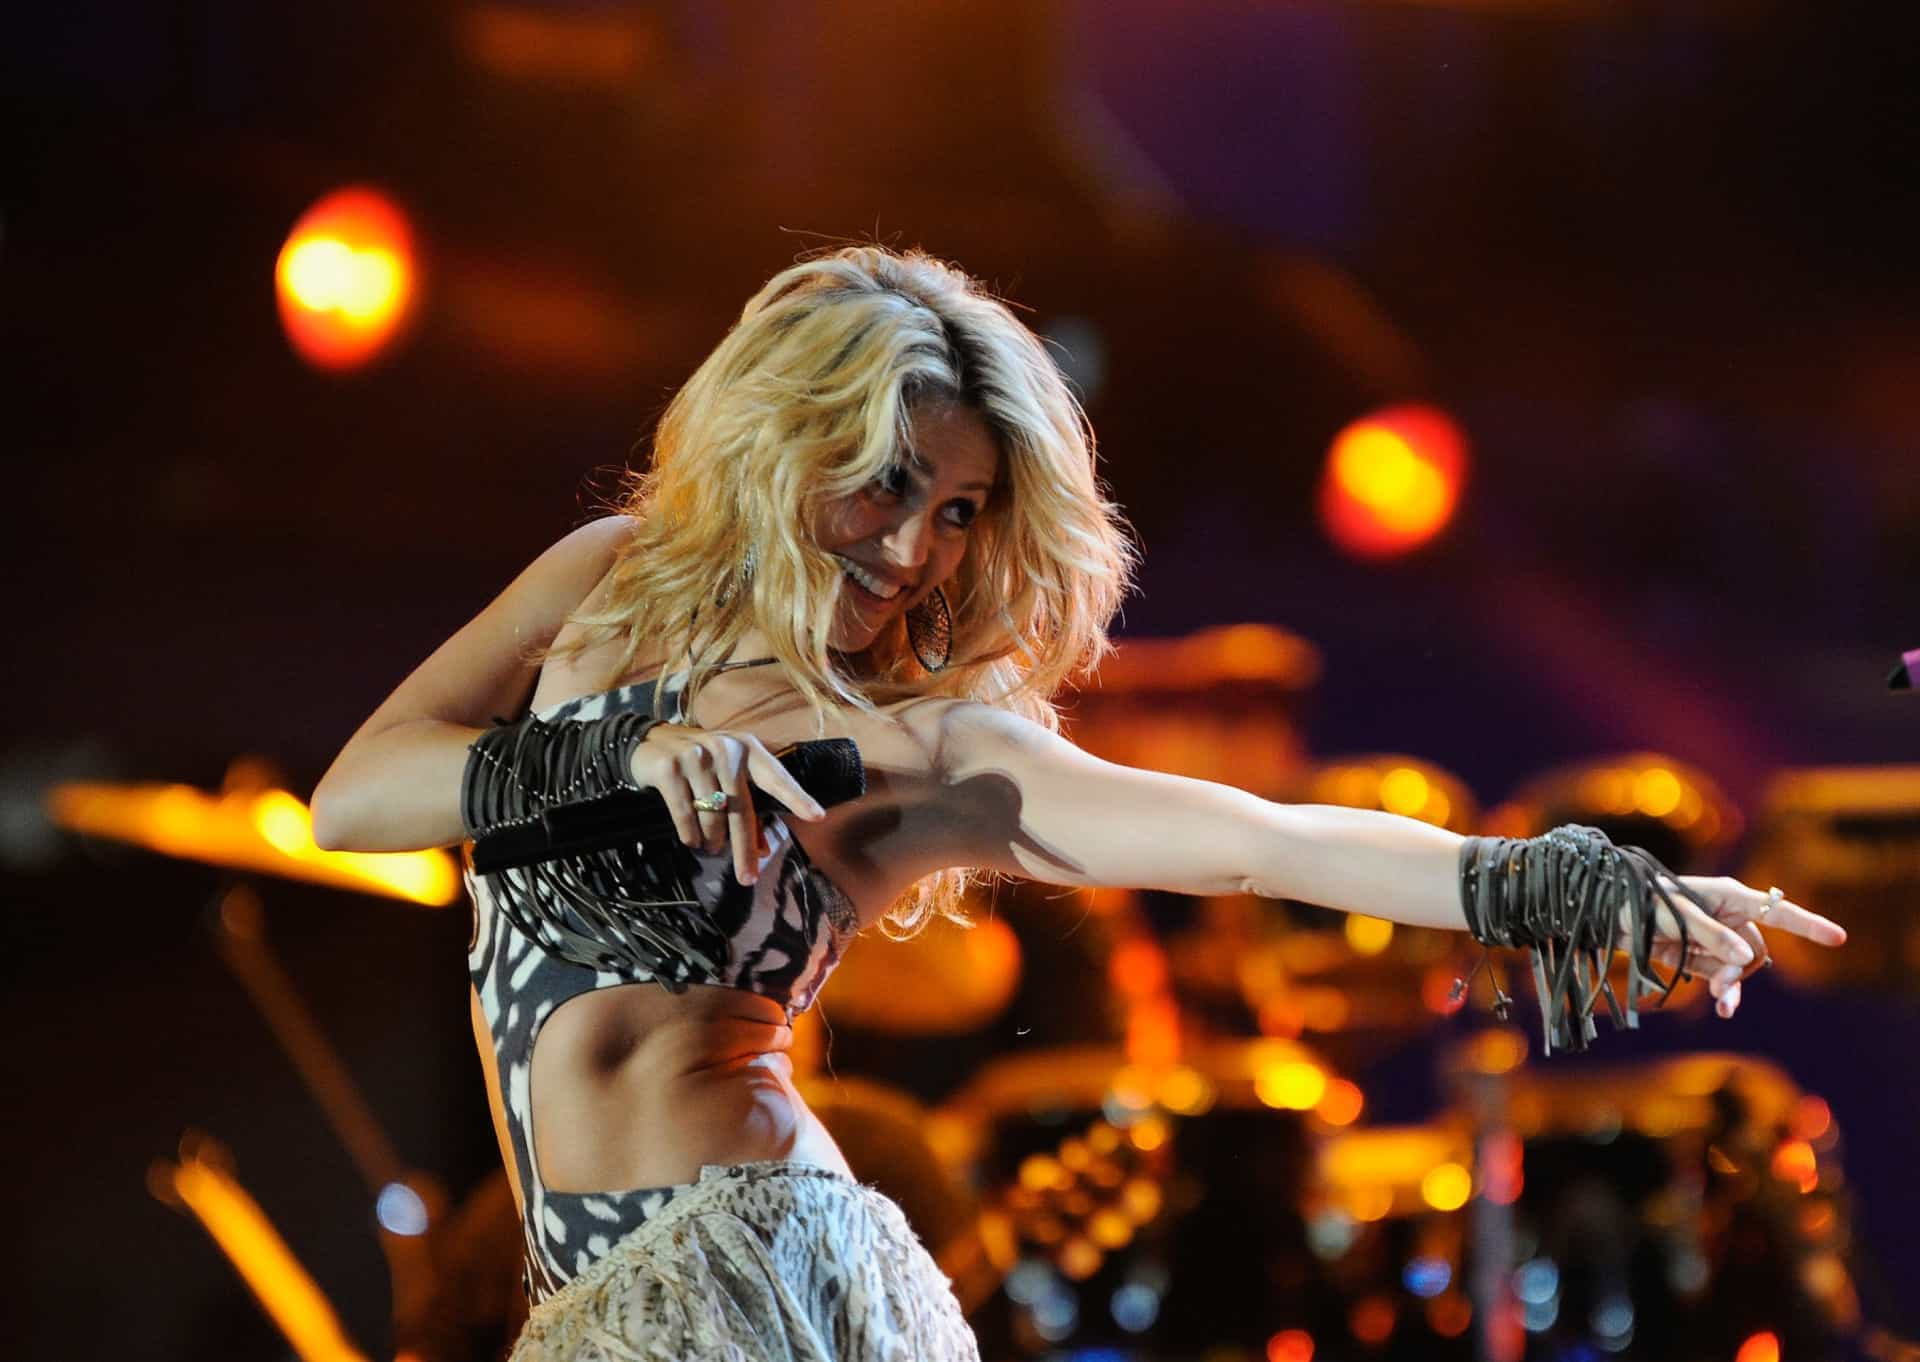 <p>Shakira introduced belly dancing to the Western world and mainstream pop music.</p><p>You may also like:<a href="https://www.starsinsider.com/n/454578?utm_source=msn.com&utm_medium=display&utm_campaign=referral_description&utm_content=624139en-ae"> Famous real-life giants in history </a></p>